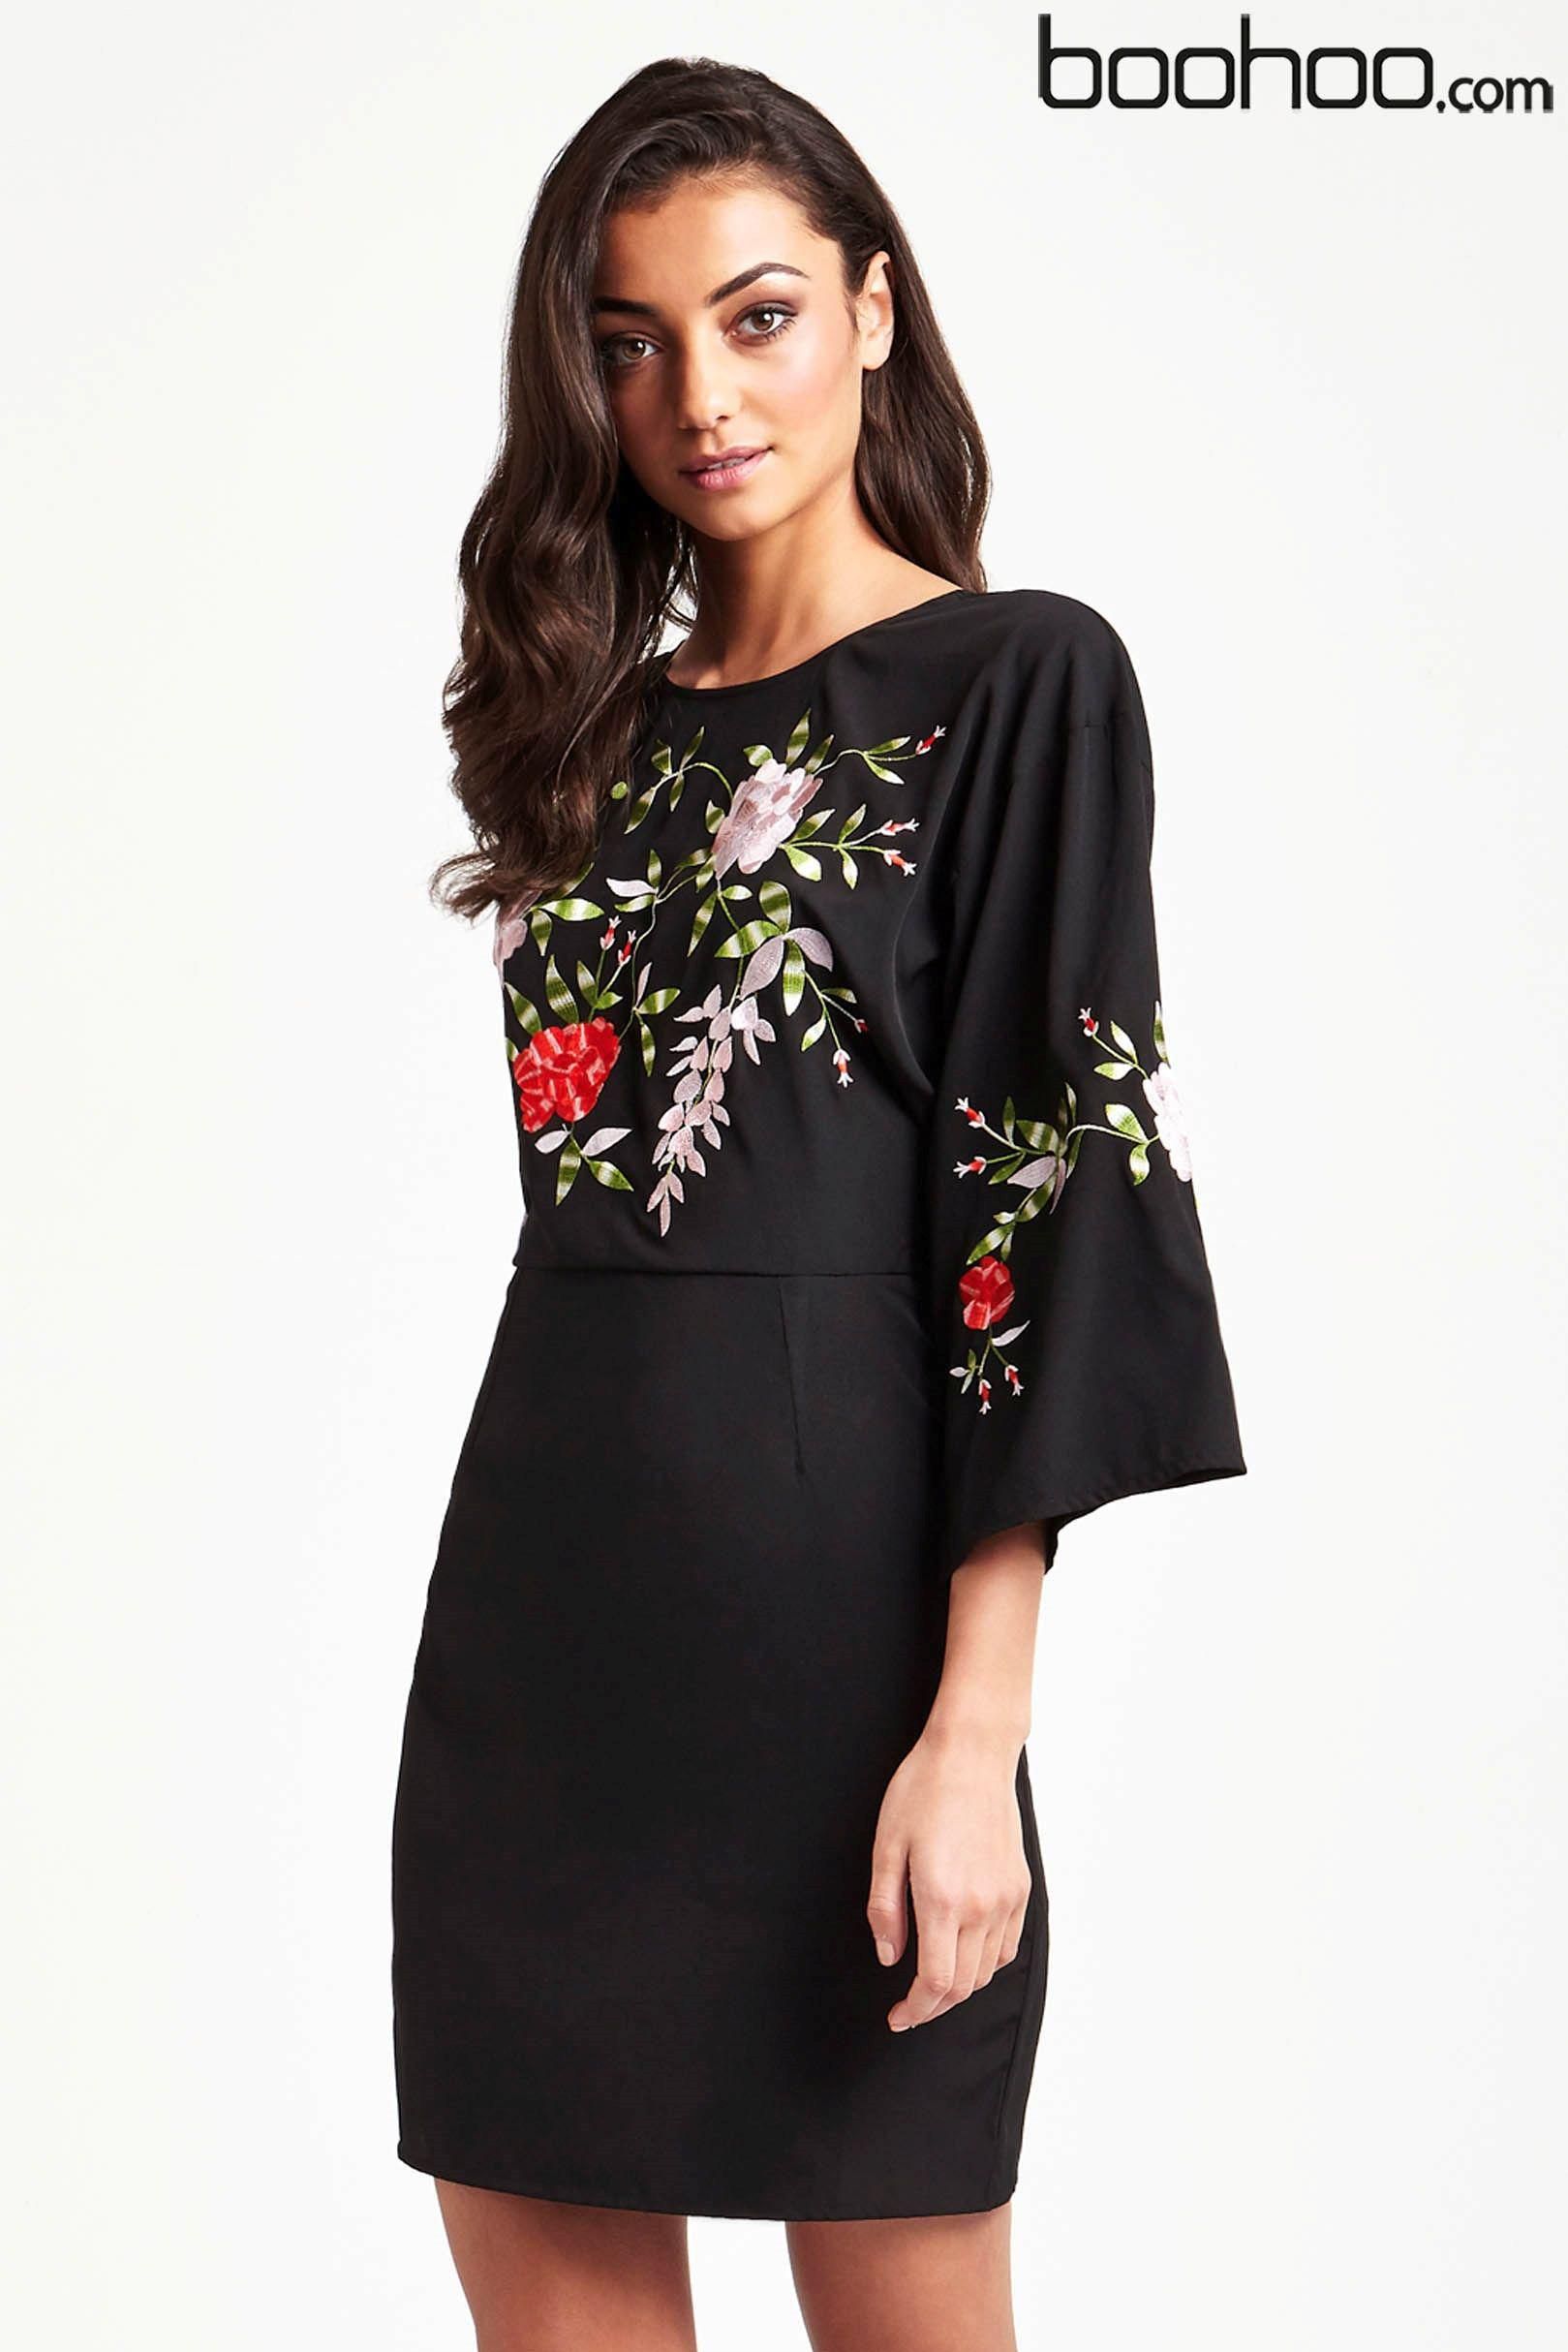 Boohoo Embroidered Tie Back Dress